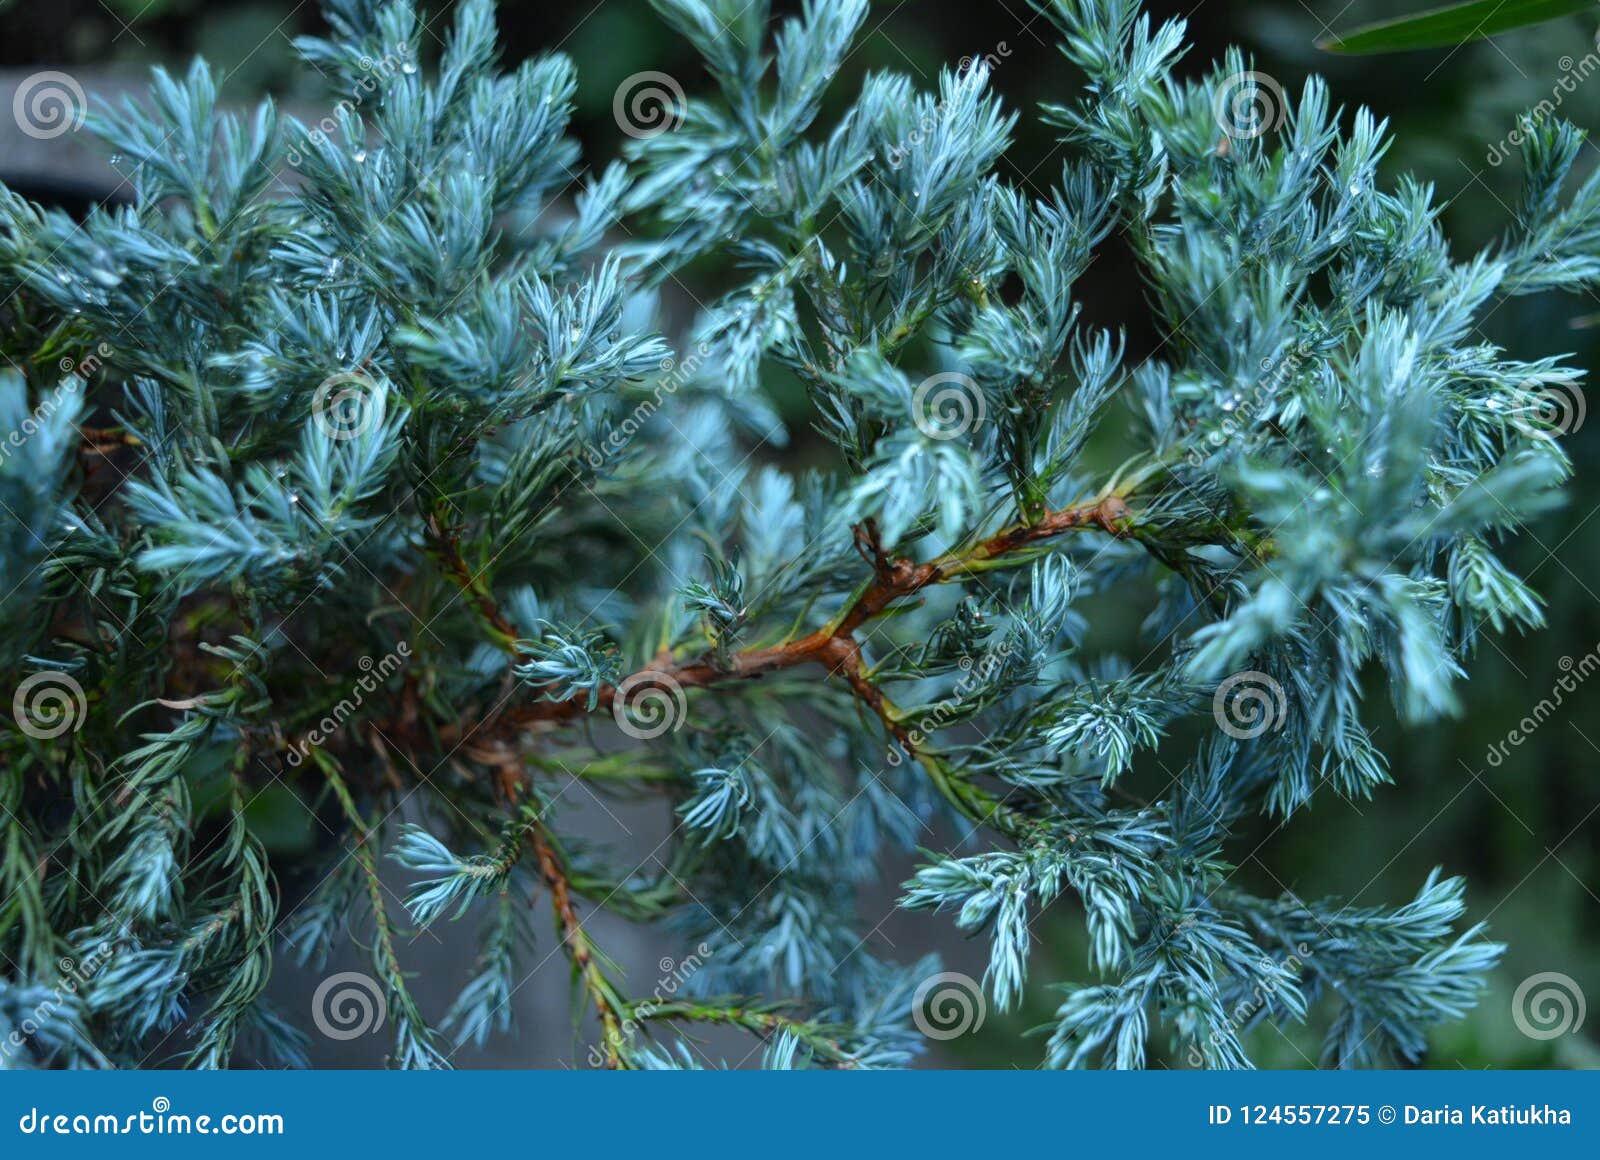 Beautiful And Shaggy Flowers Of A Juniper Blue Green Color Blue Star Stock Image - Image of ...